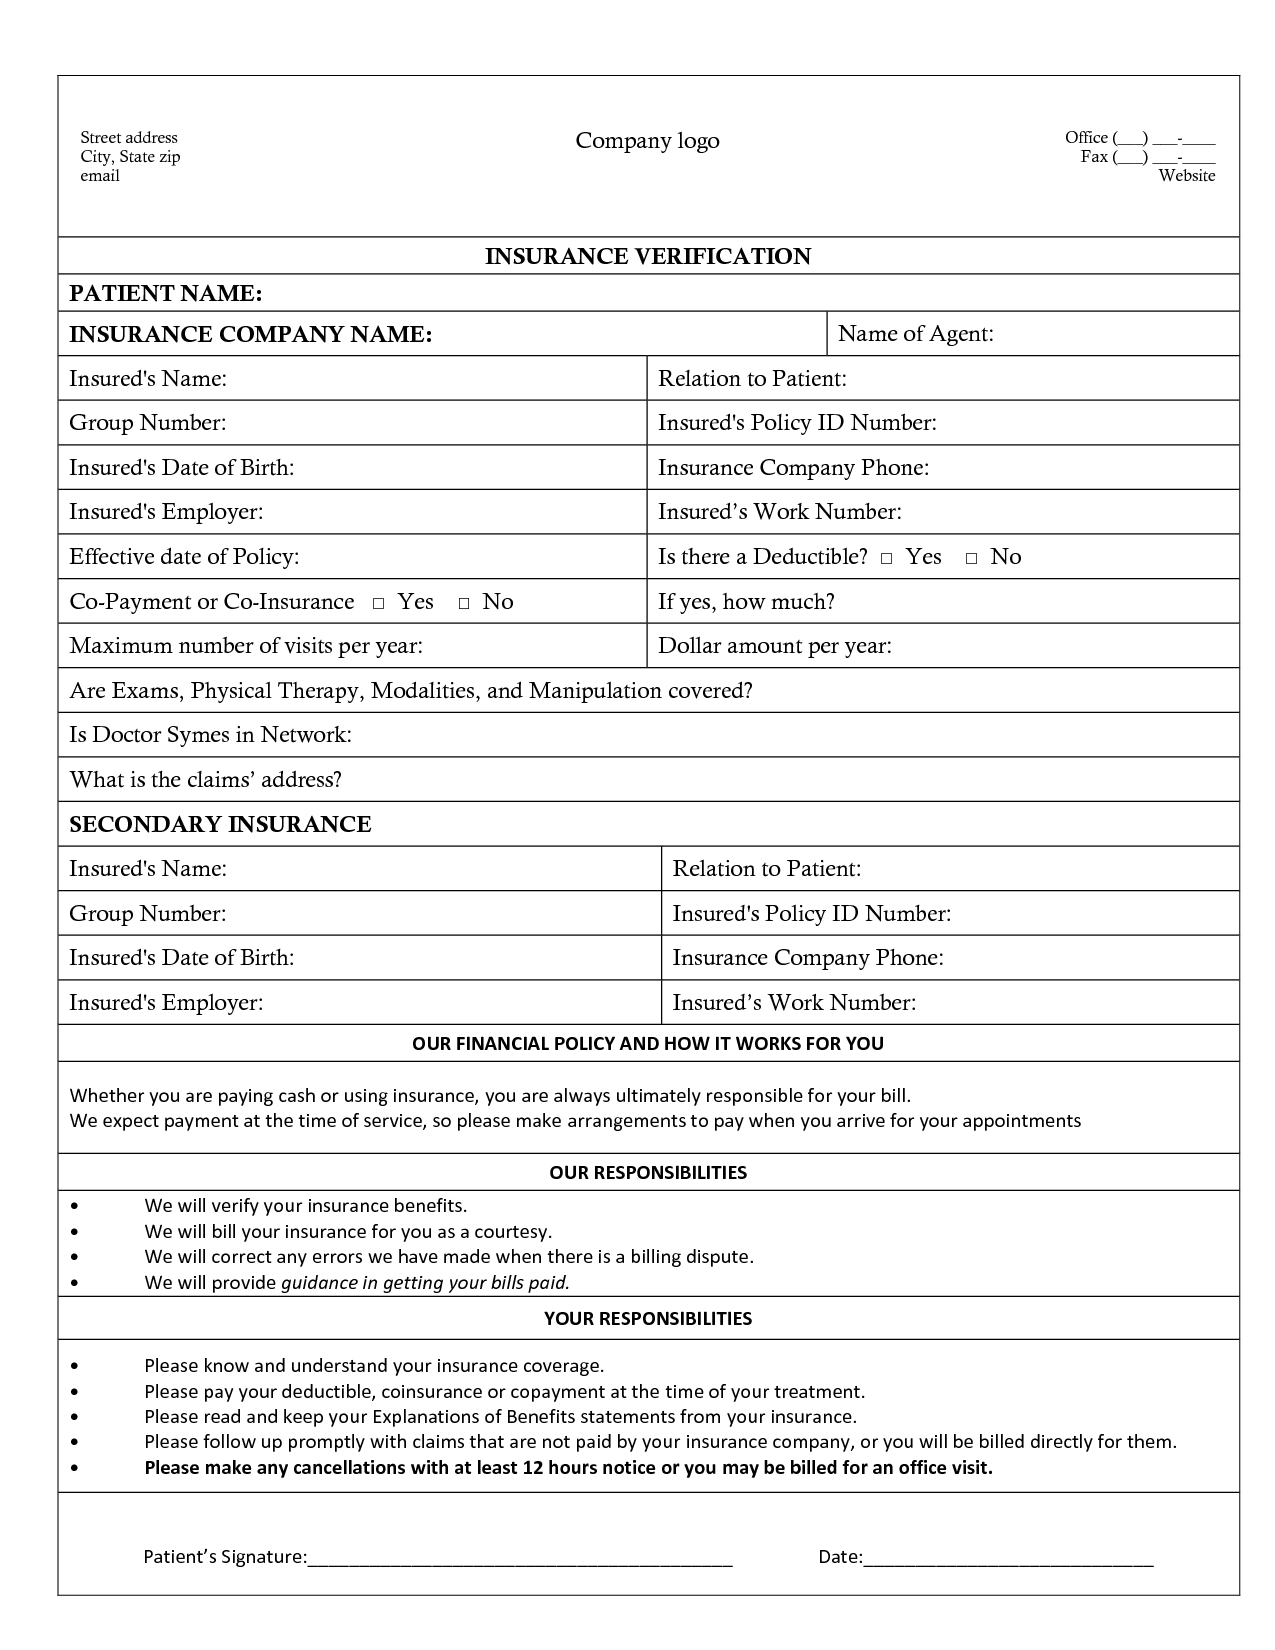 9-best-images-of-free-printable-insurance-forms-medical-insurance-verification-form-template